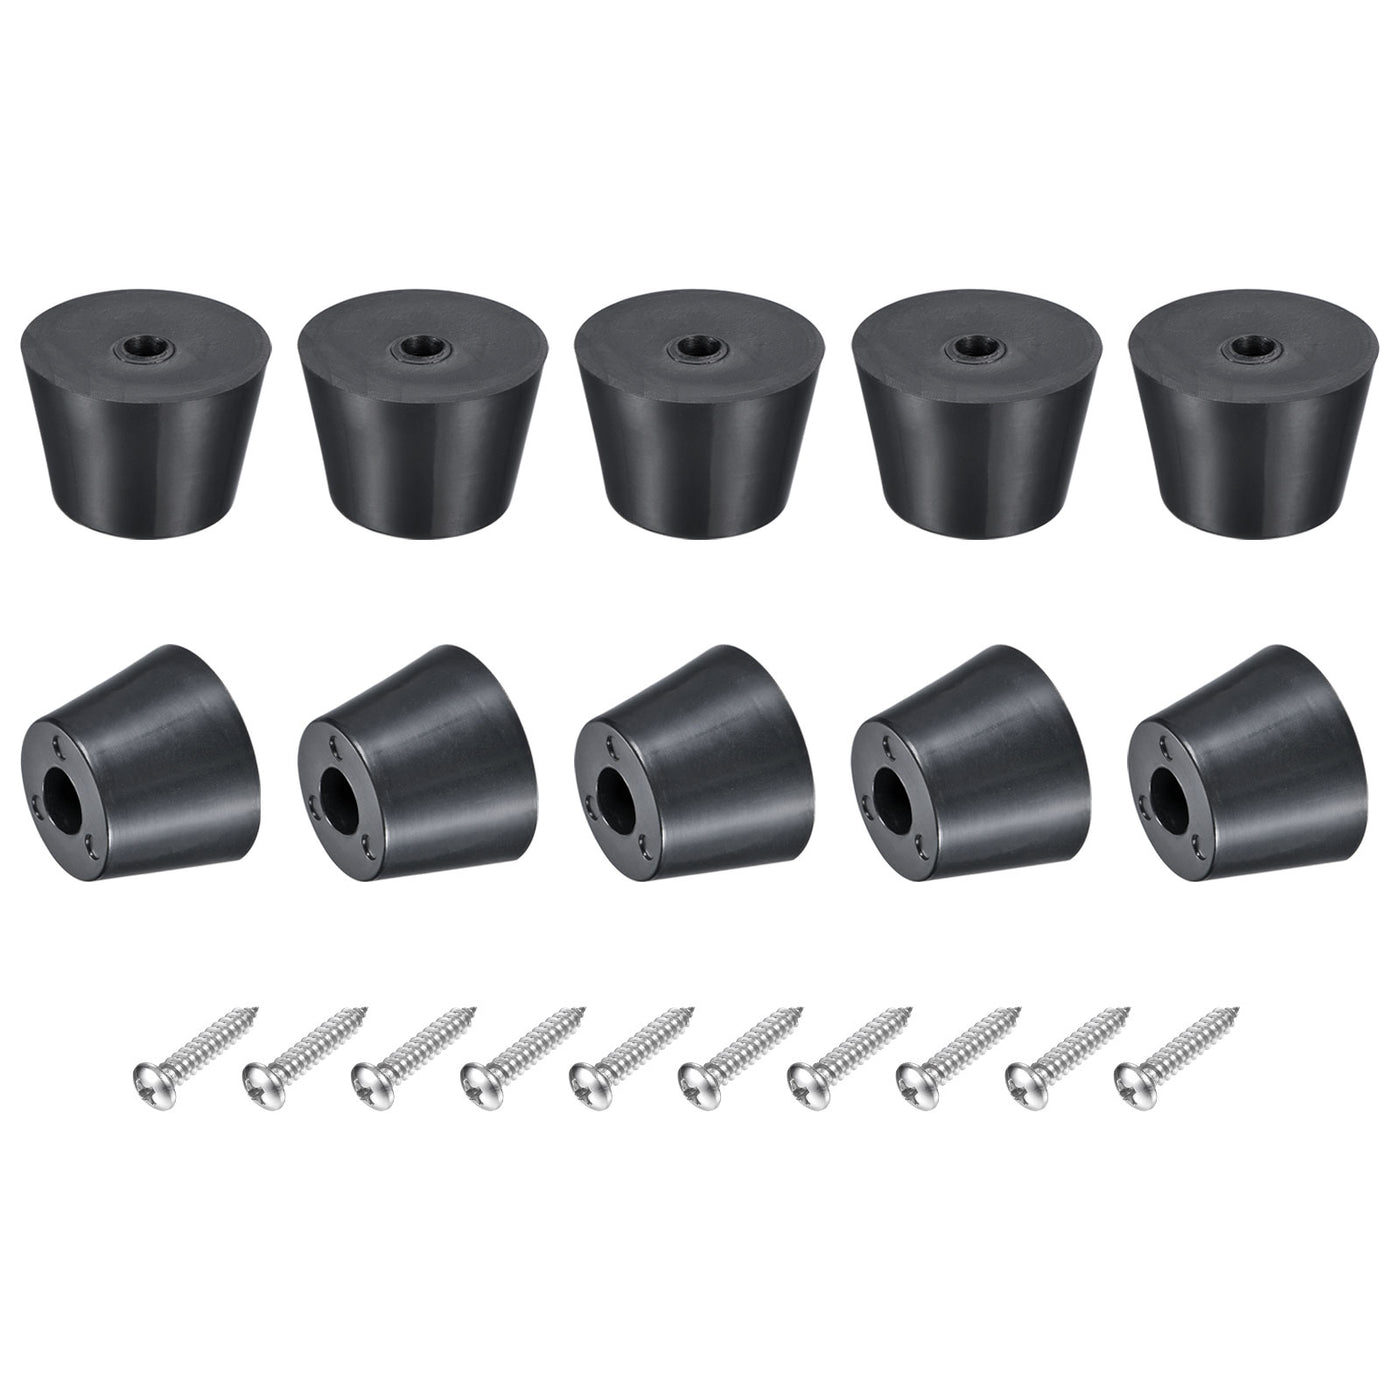 uxcell Uxcell Rubber Bumper Feet, 0.79" H x 1.14" W Round Pads with Stainless Steel Washer and Screws for Furniture, Appliances, Electronics 16 Pcs